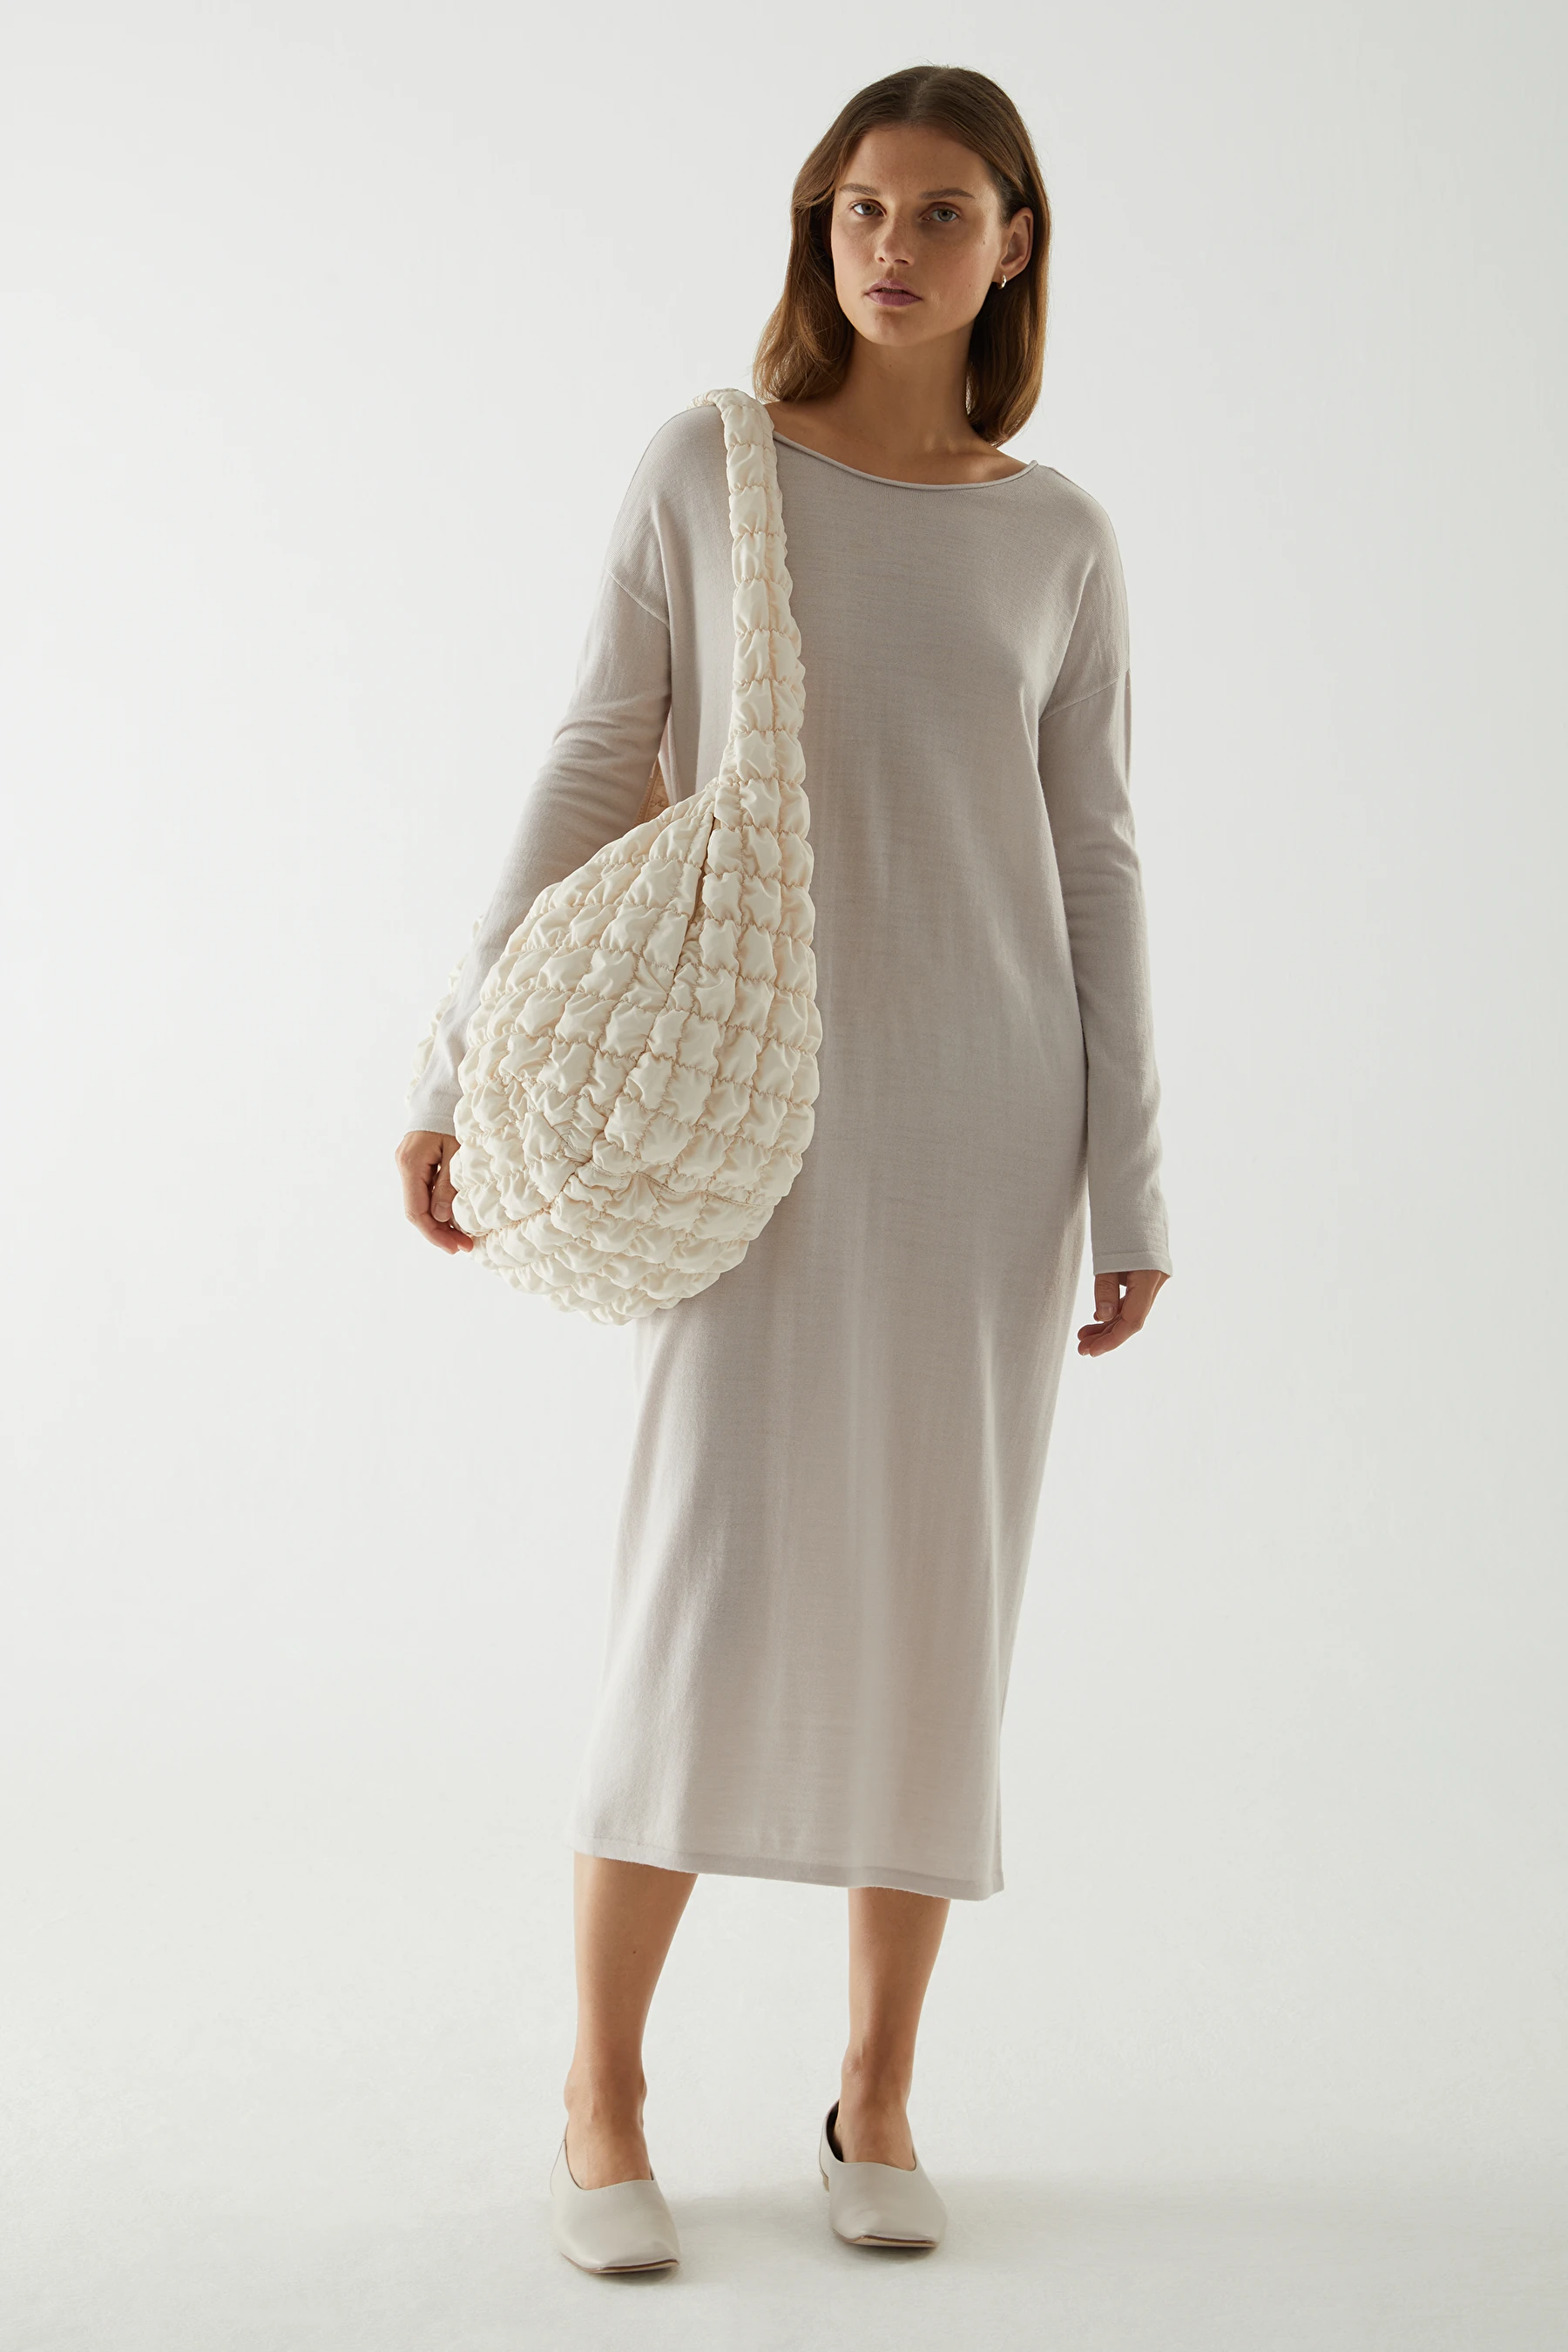 COS + Long Wool Knitted Dress